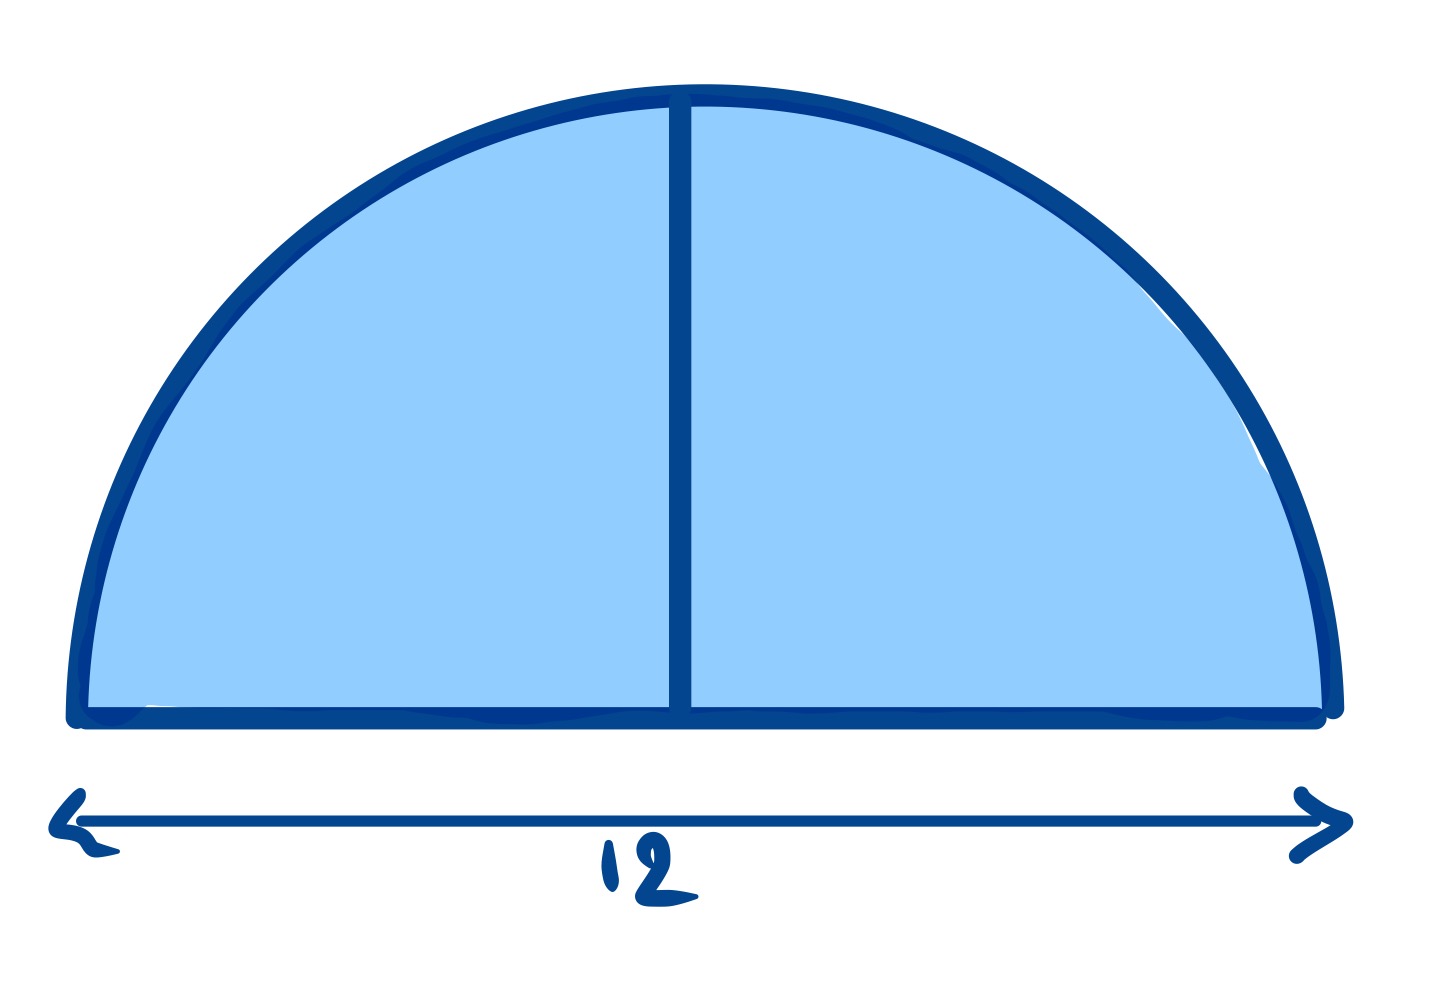 Two quarter circles and a semi-circle special a